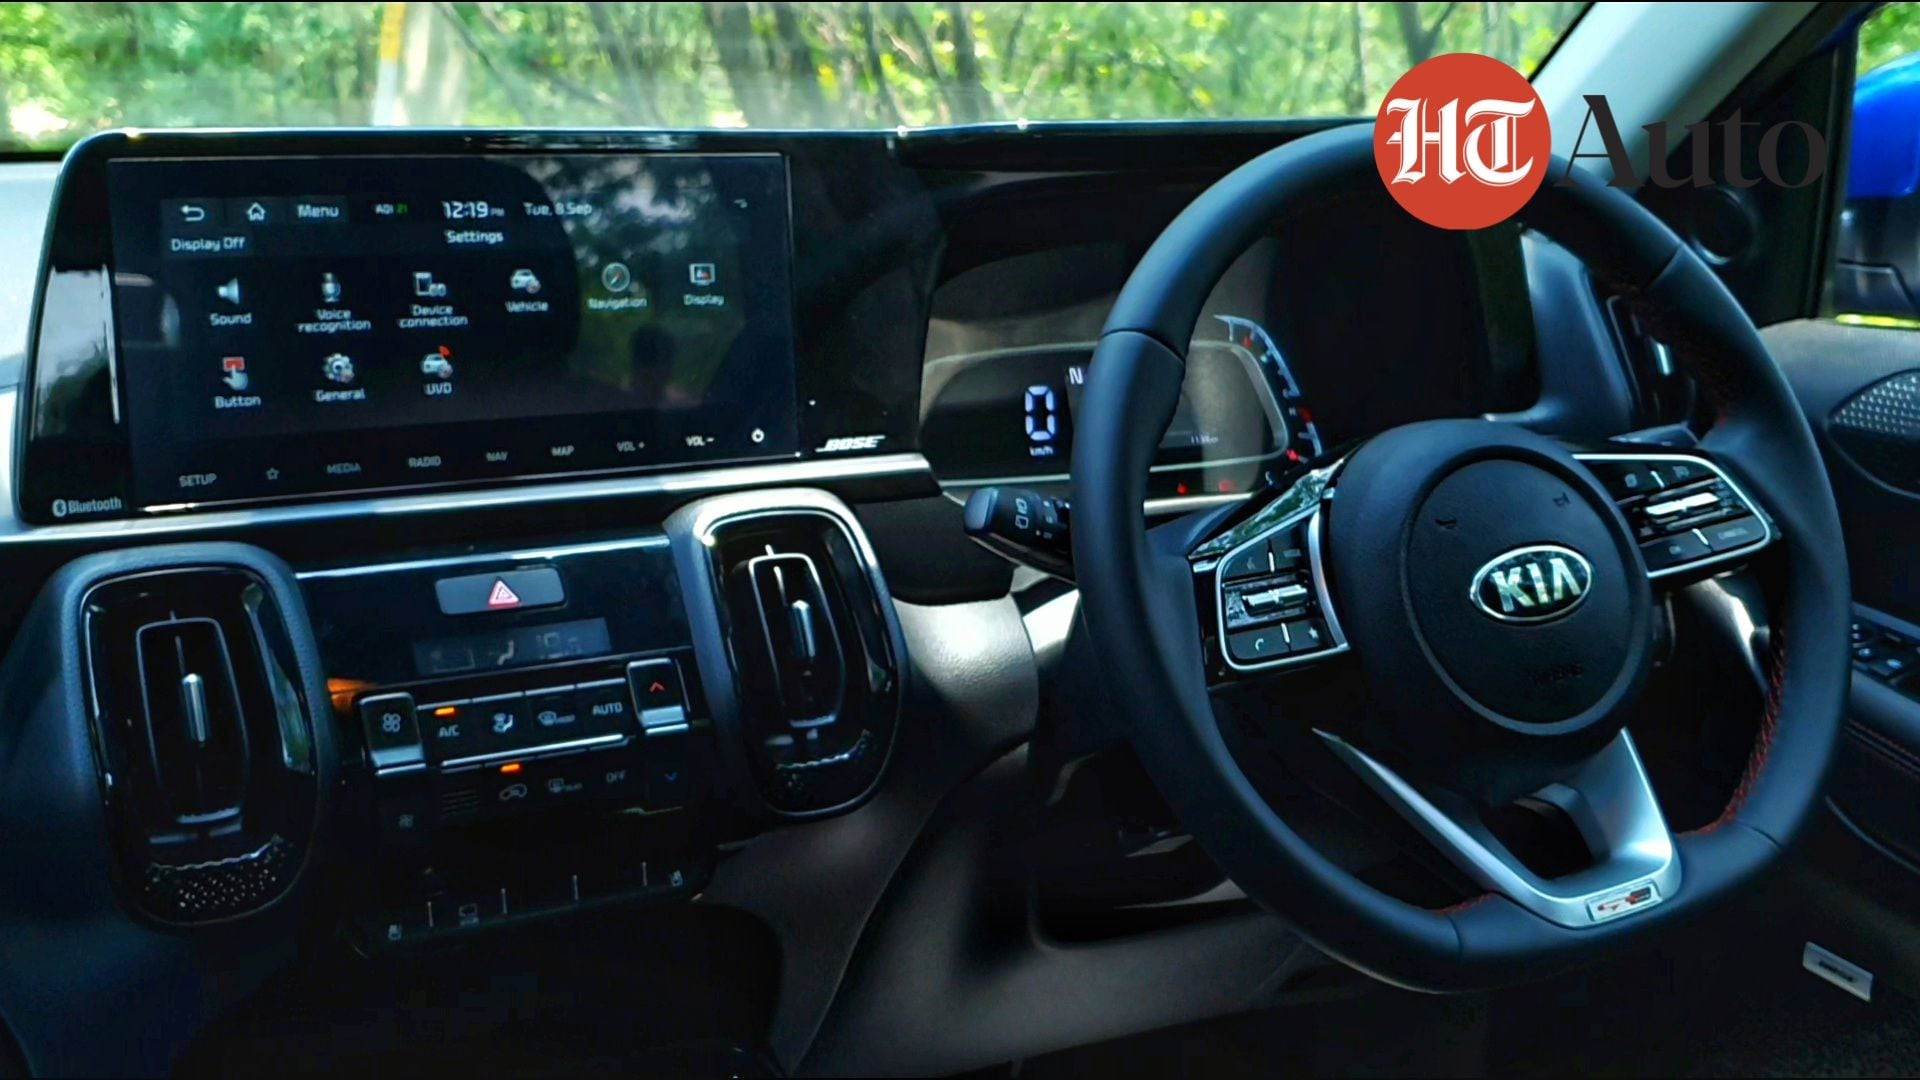 Kia boasts of a 10.25-inch touchscreen infotainment system.